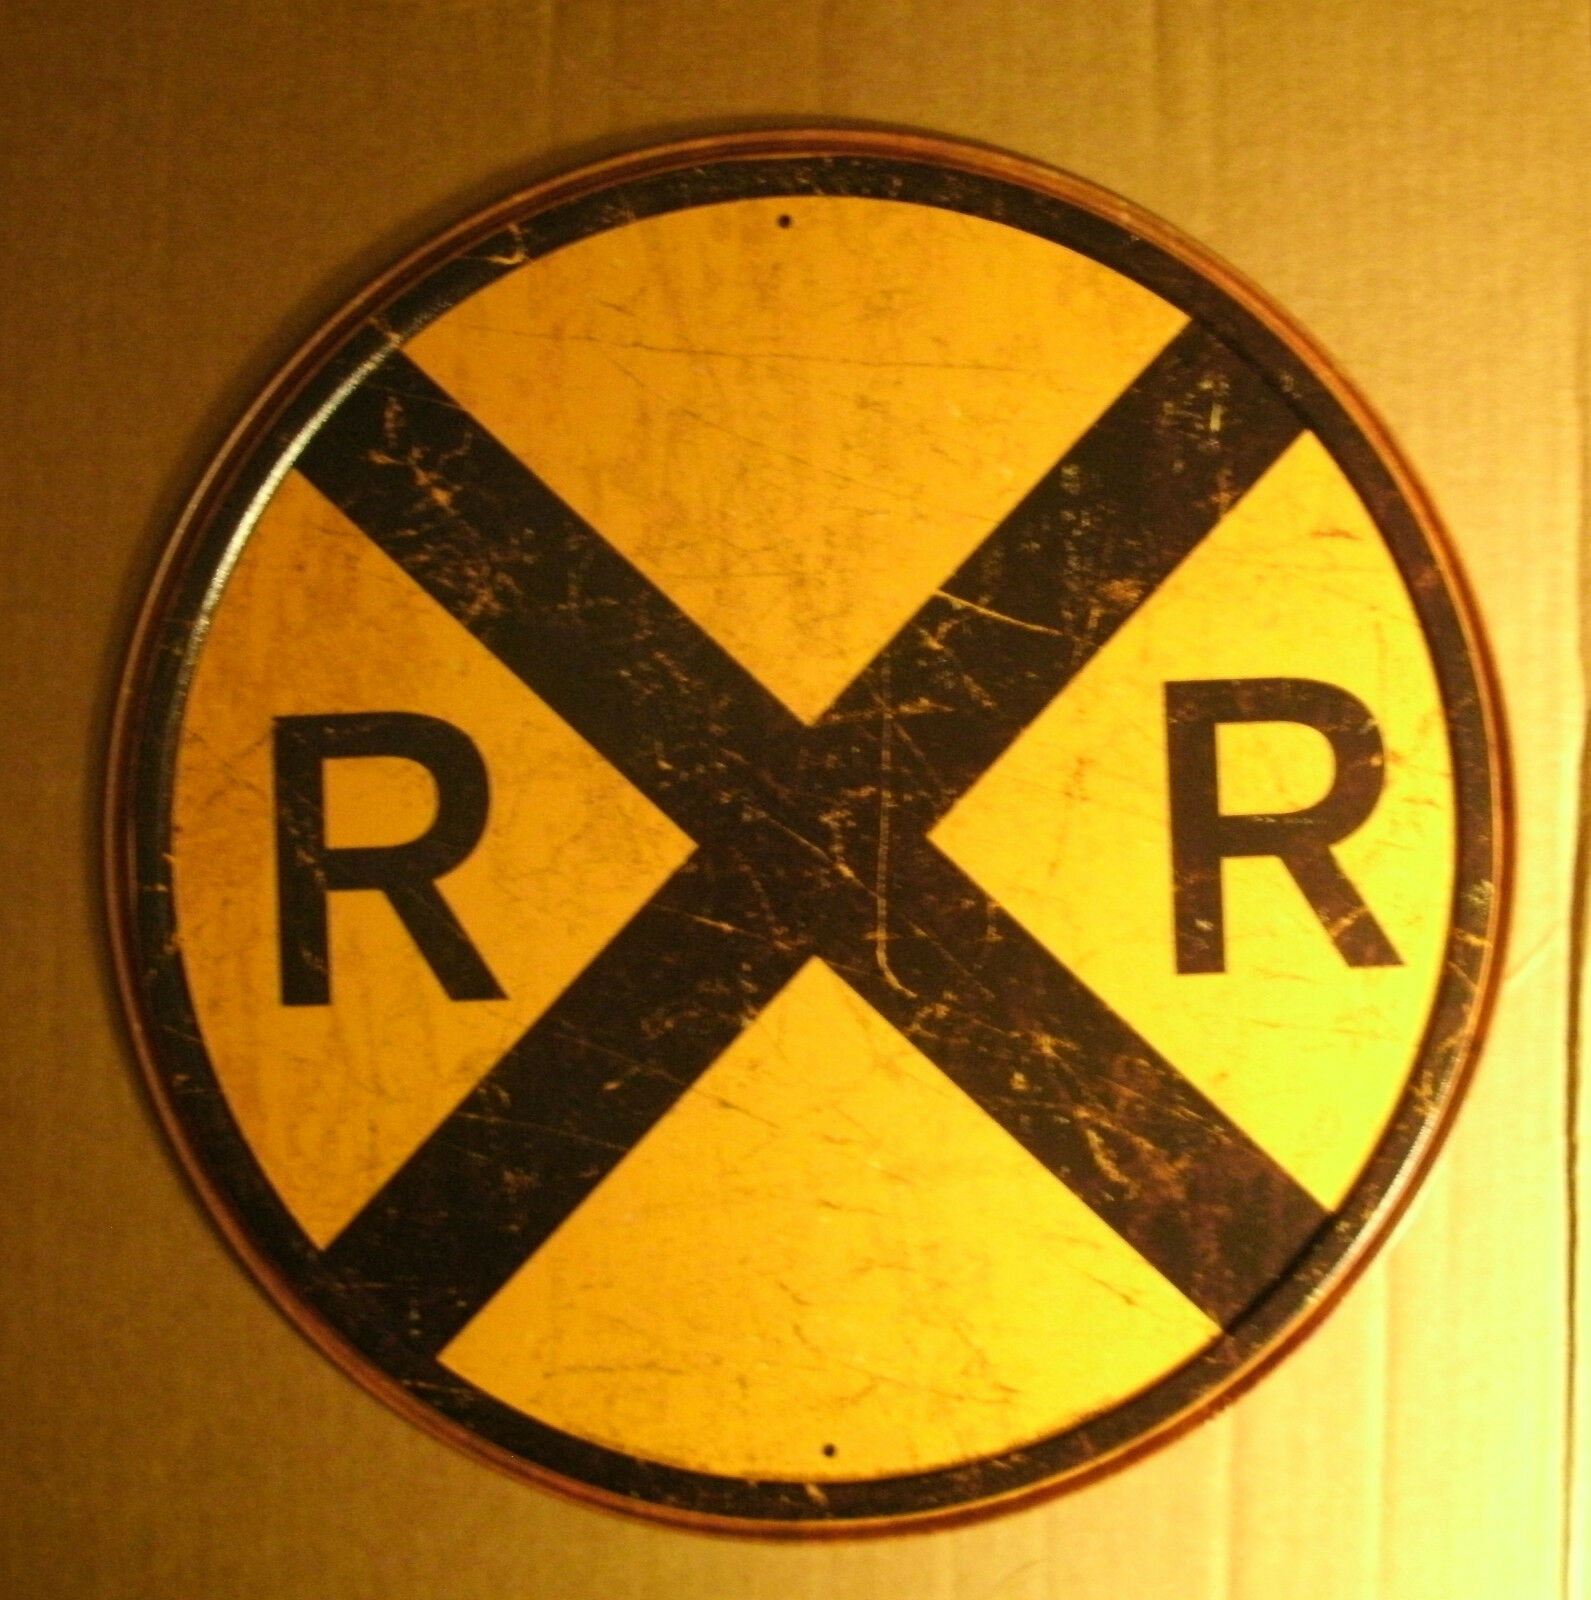 Round Tin Sign - Rr Railroad - Old Style Train Crossing - Vintage Man Cave Look